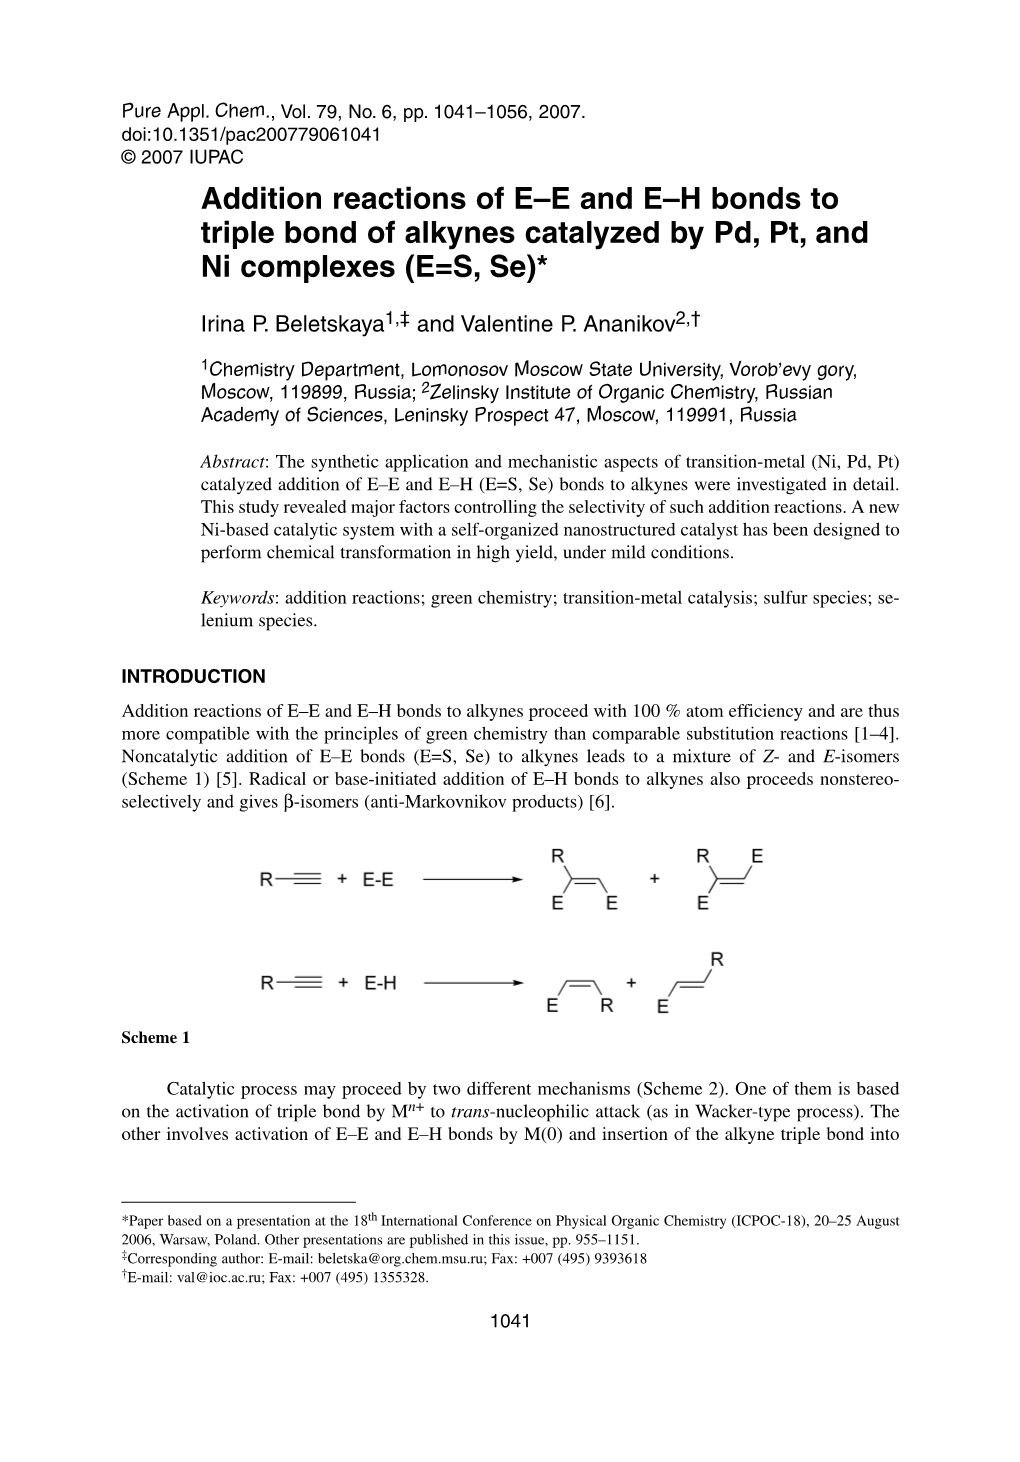 Addition Reactions of EE and EH Bonds to Triple Bond of Alkynes Catalyzed by Pd, Pt, and Ni Complexes